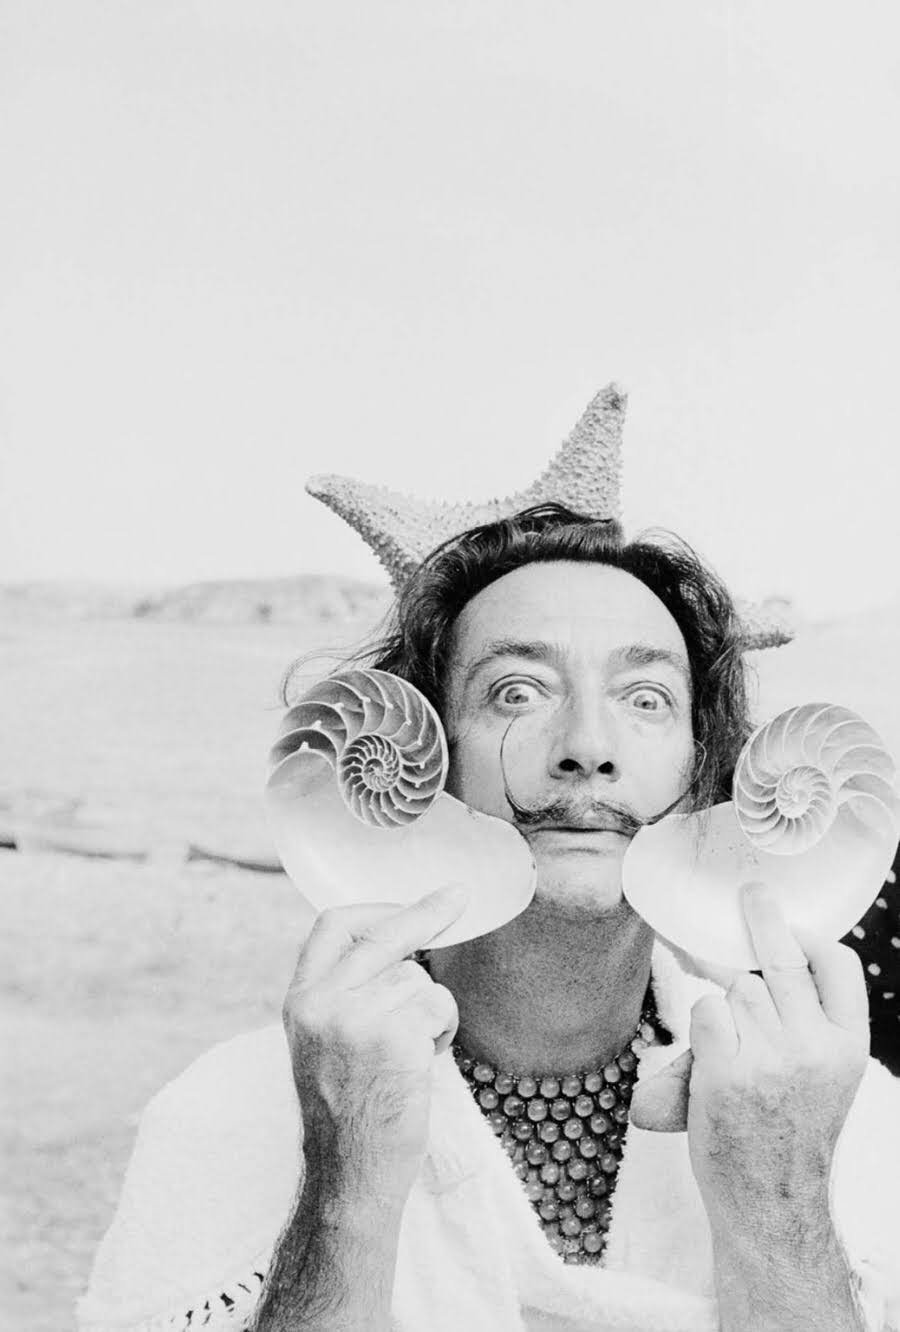 One day with Salvador Dalí: Surreal Photo Shoot of the Spanish Artist in his Seaside Villa, 1955